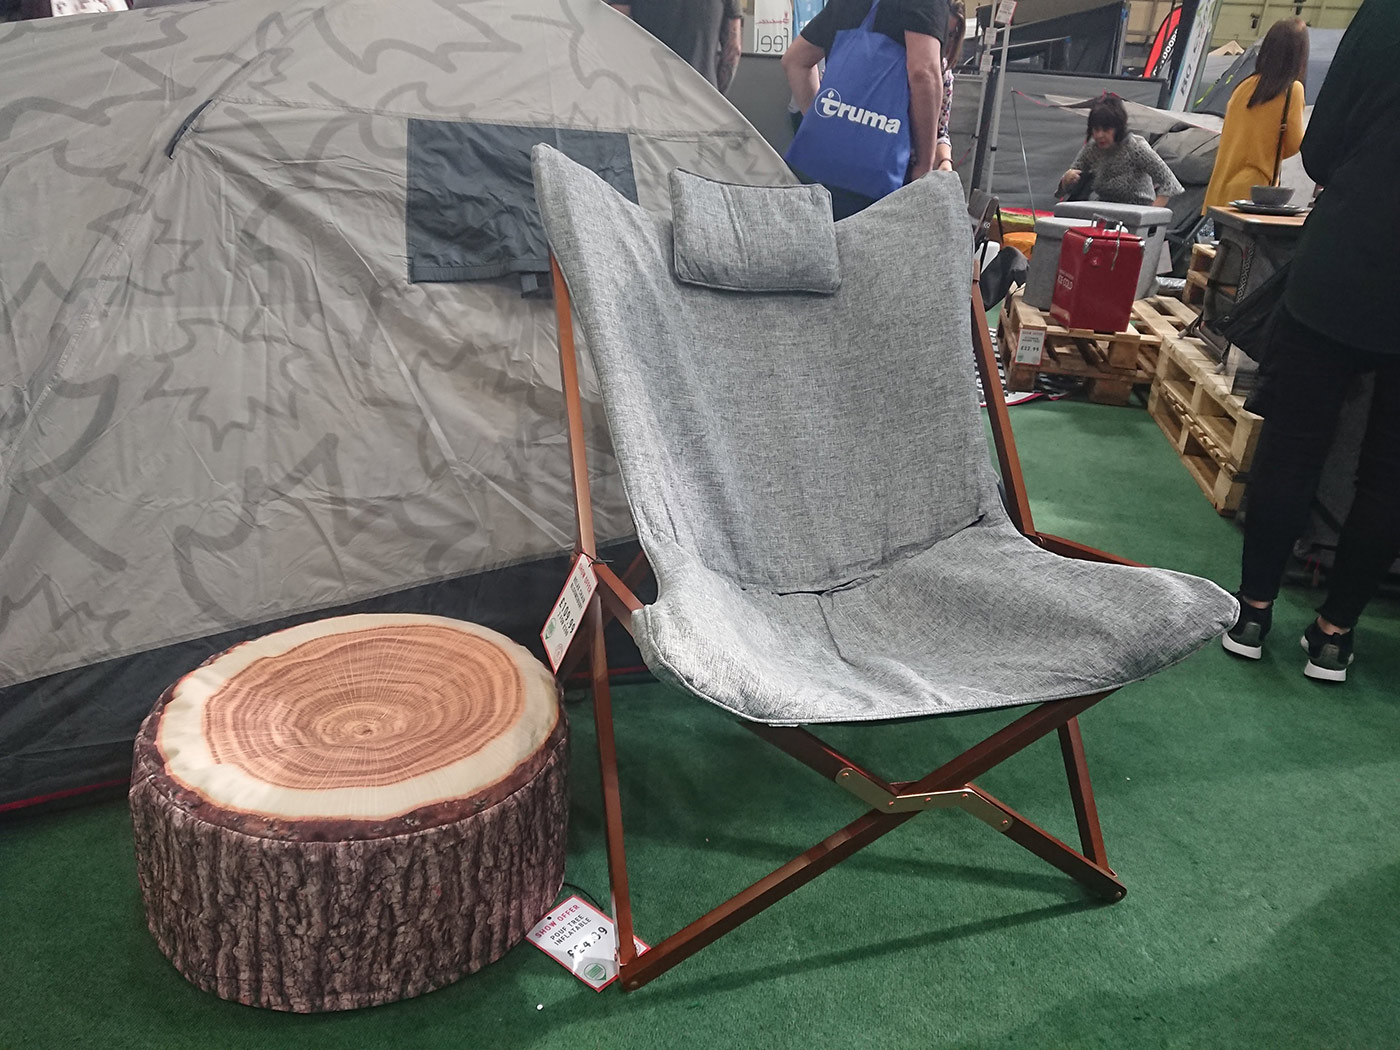 urban camping chairs